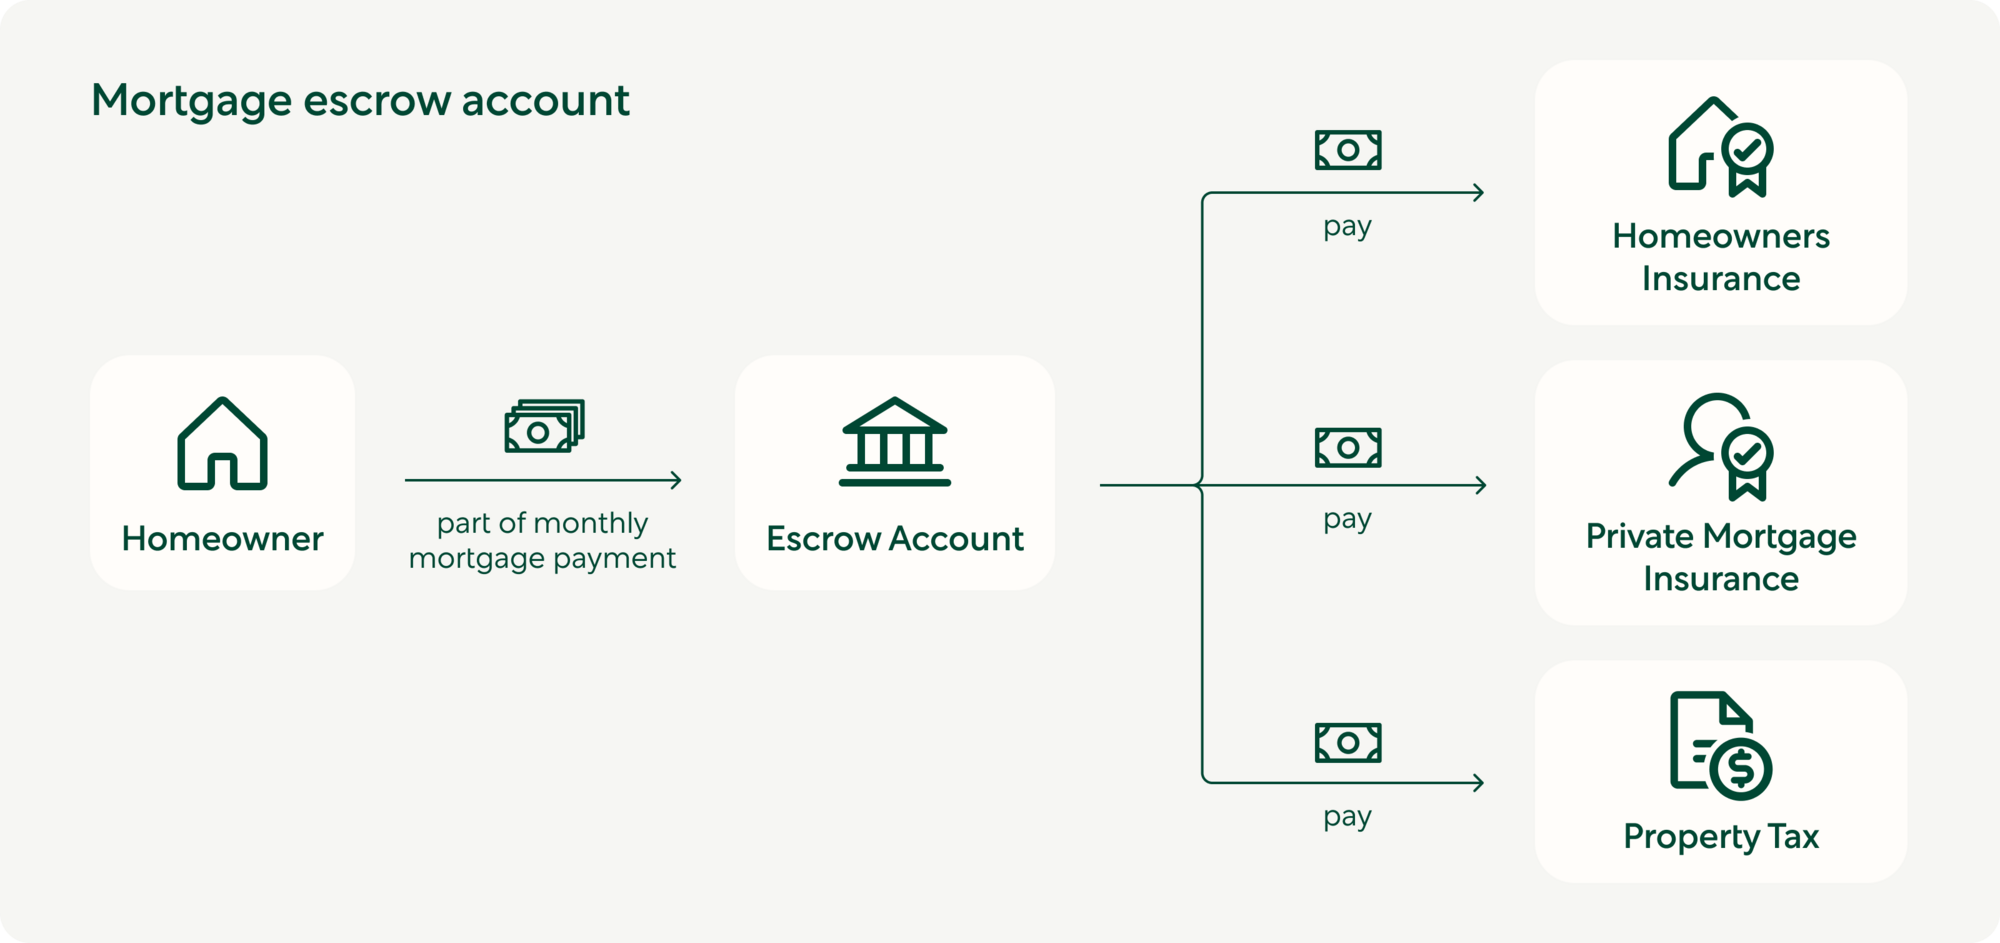 How a mortgage escrow account works